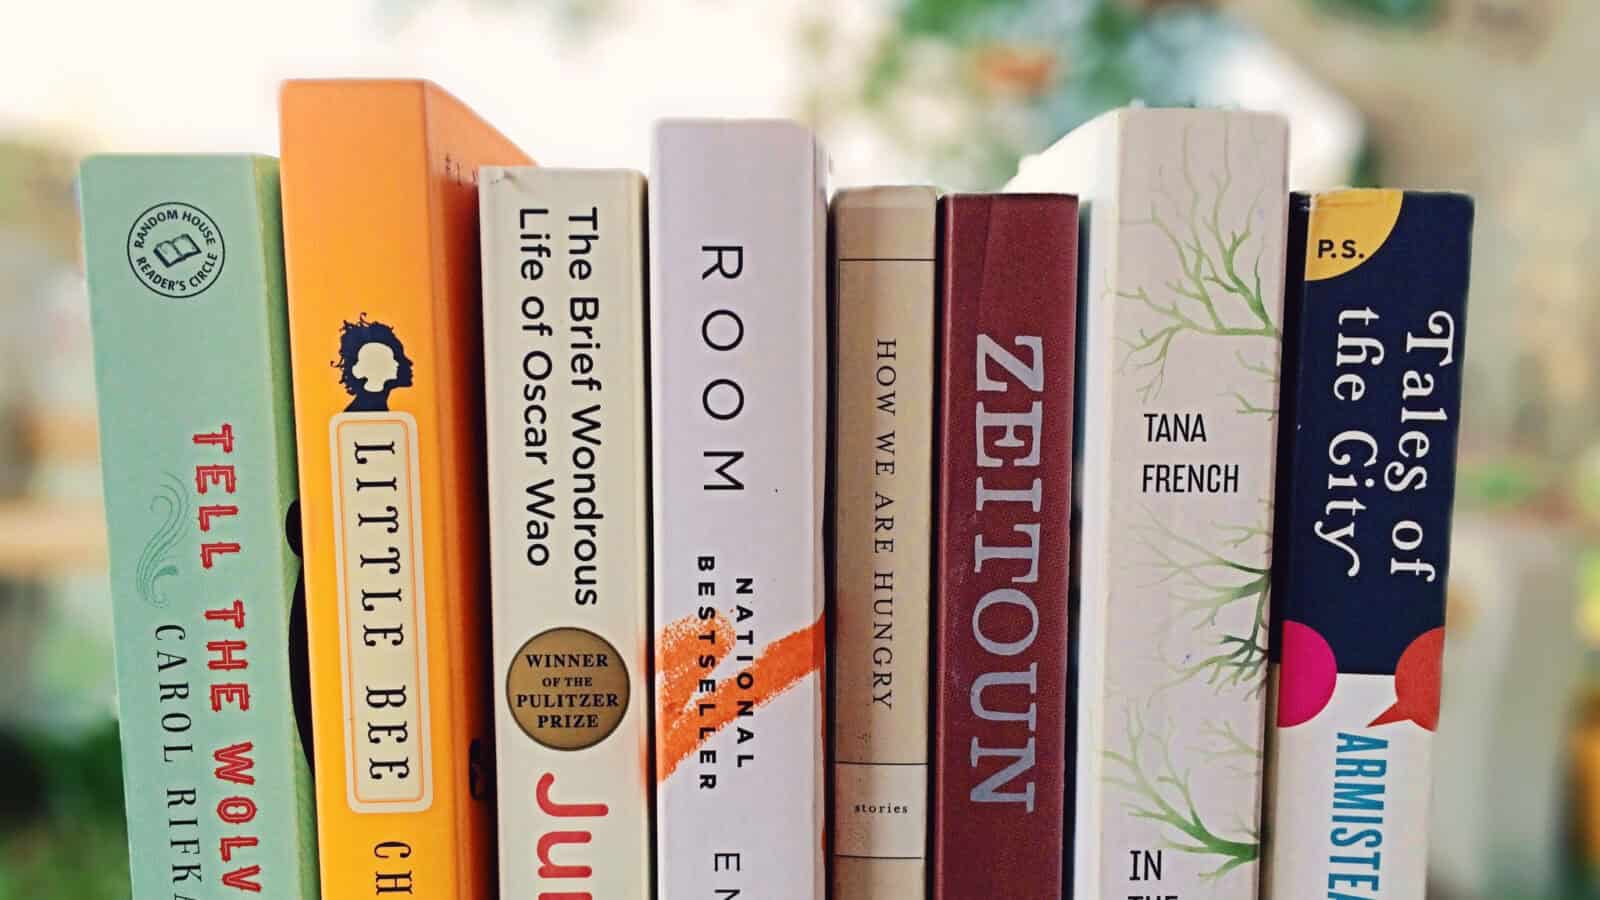 Books show bright spines on a windowsill in the sunlight. Creative Commons courtesy photo